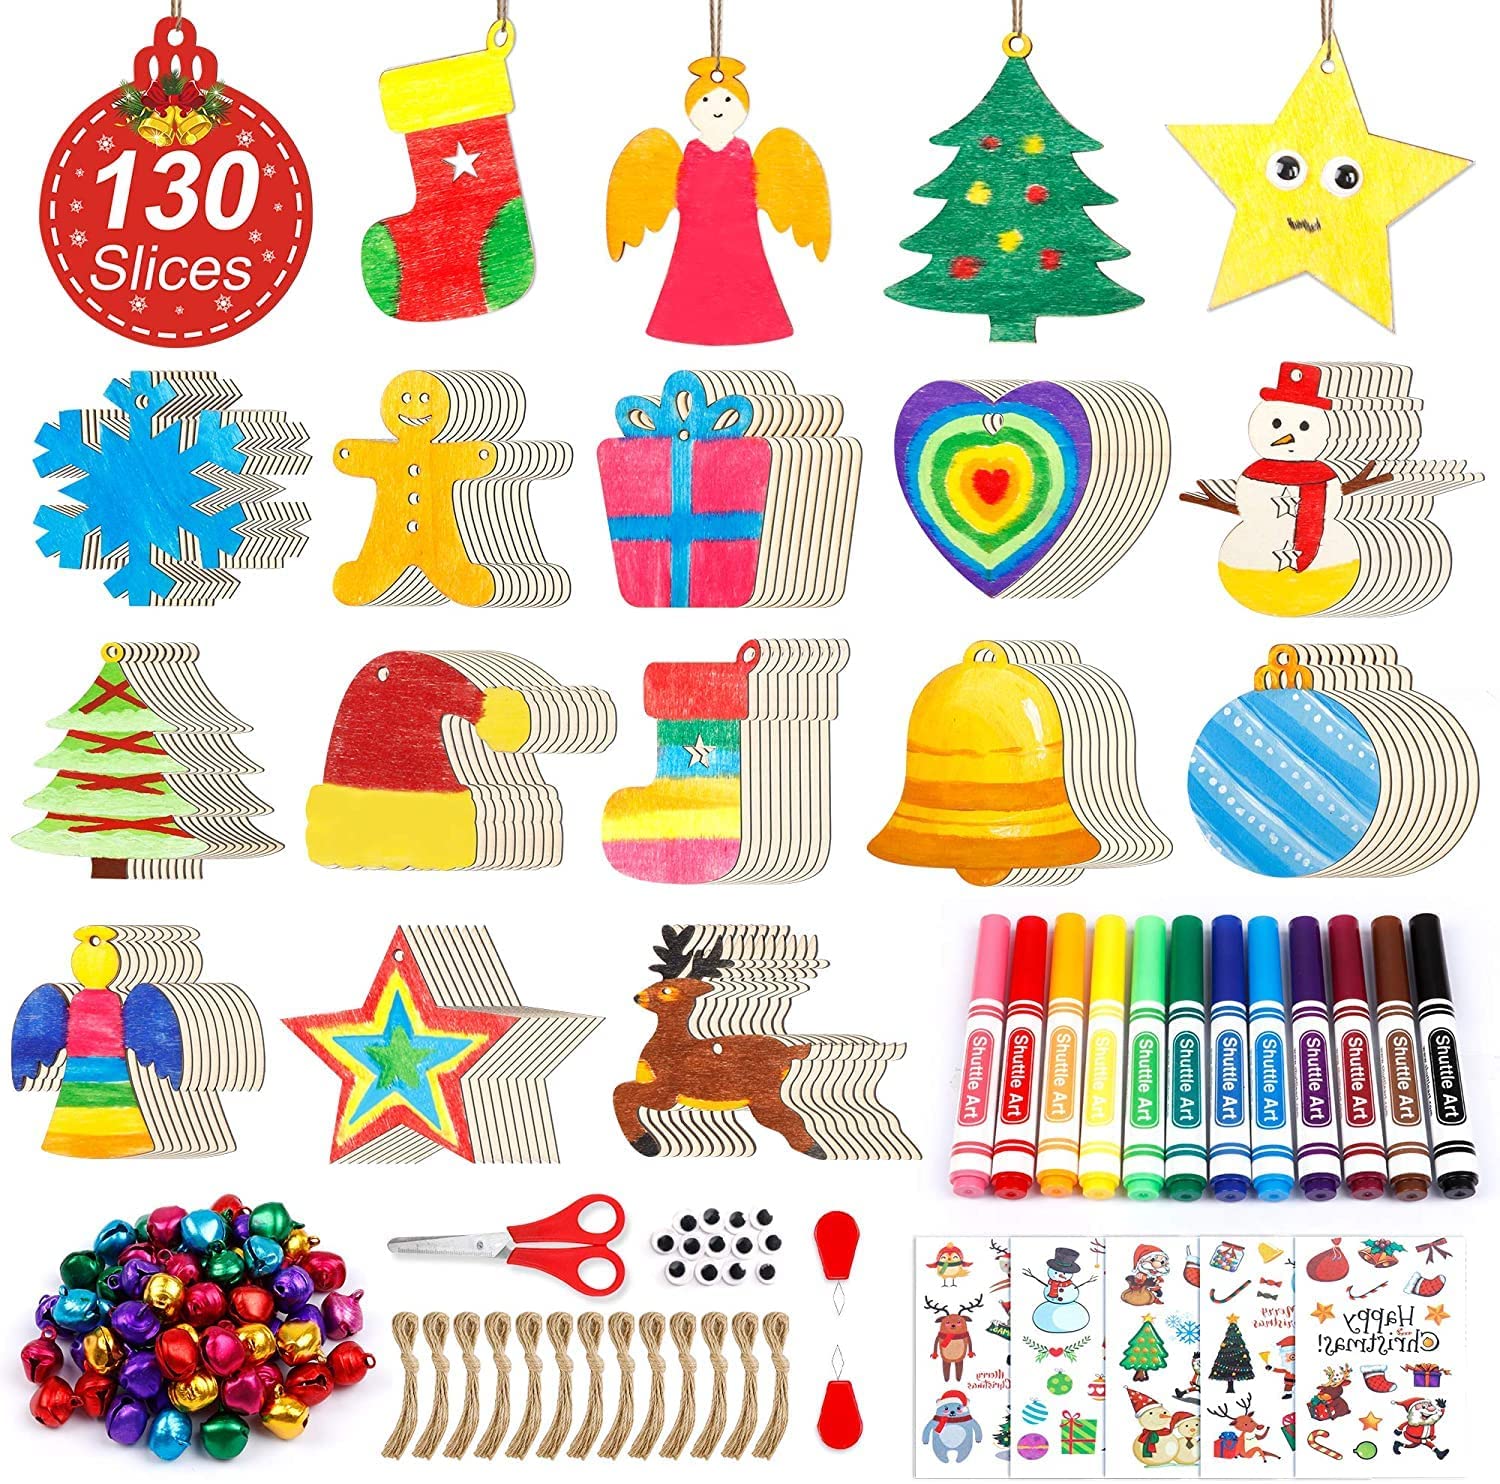 Shuttle Art 130 PCS Wooden Ornaments Kit $11.49 + Free shipping with Prime or $25+